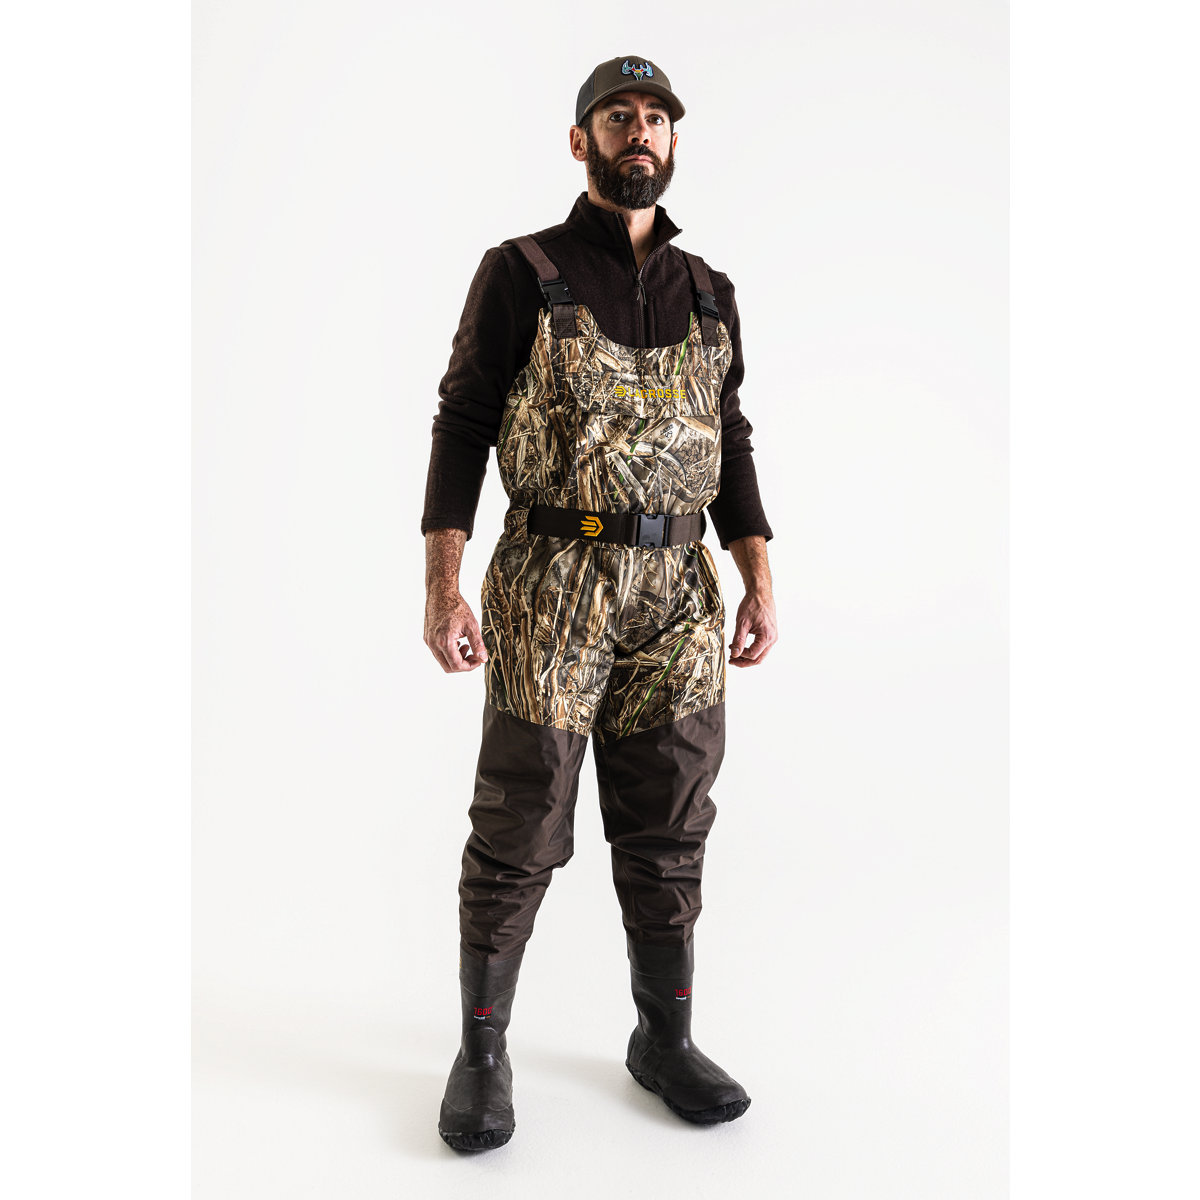 Lacrosse Men's Wetlands Insulated 1600G Wader - Realtree Max-7 - 9